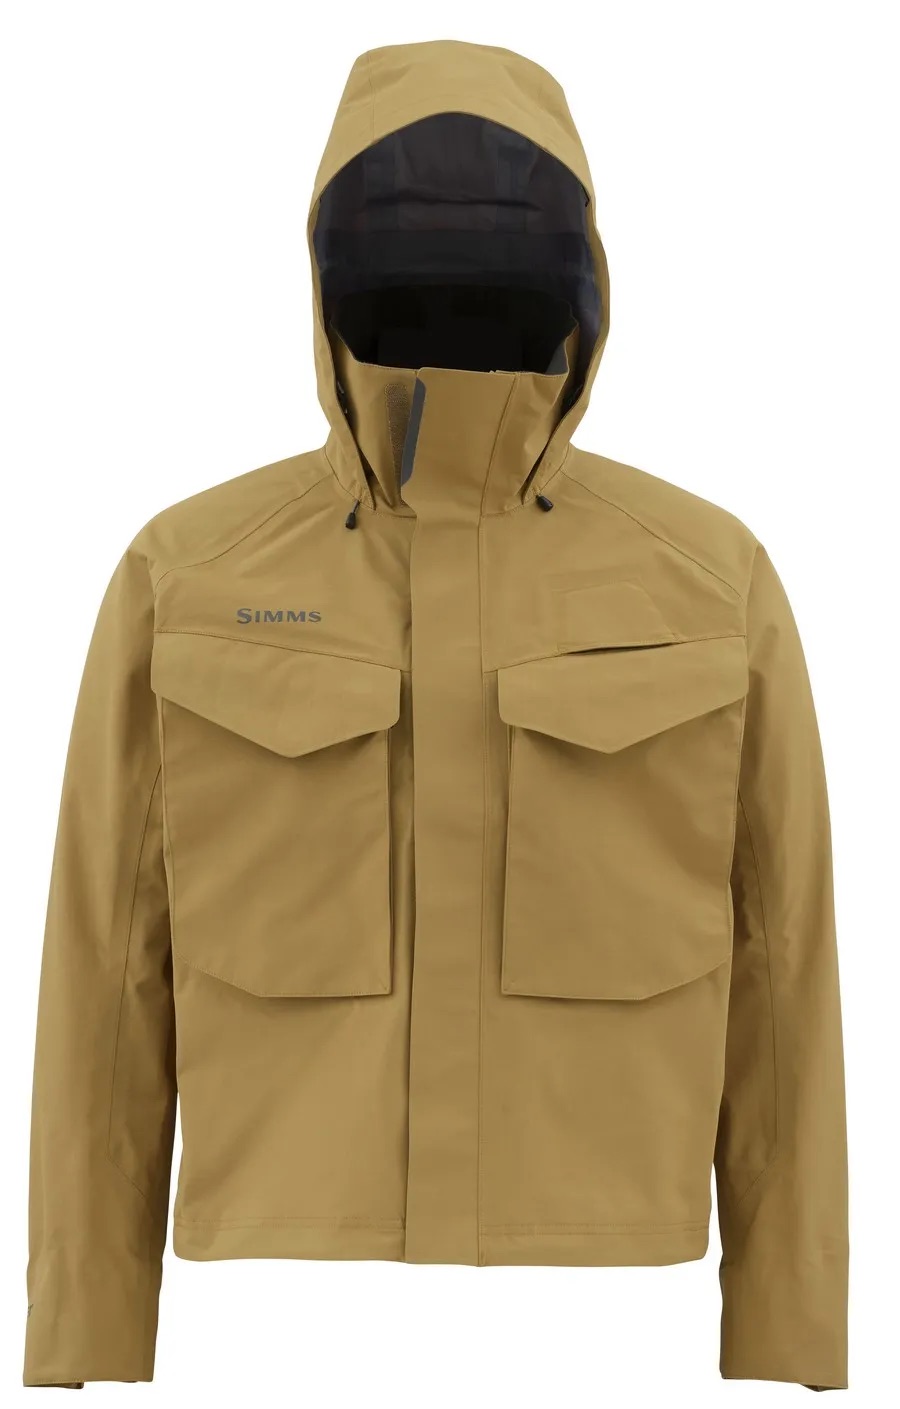 Simms M's Guide Wading Jacket (OLDER) - Honey Brown - XXL